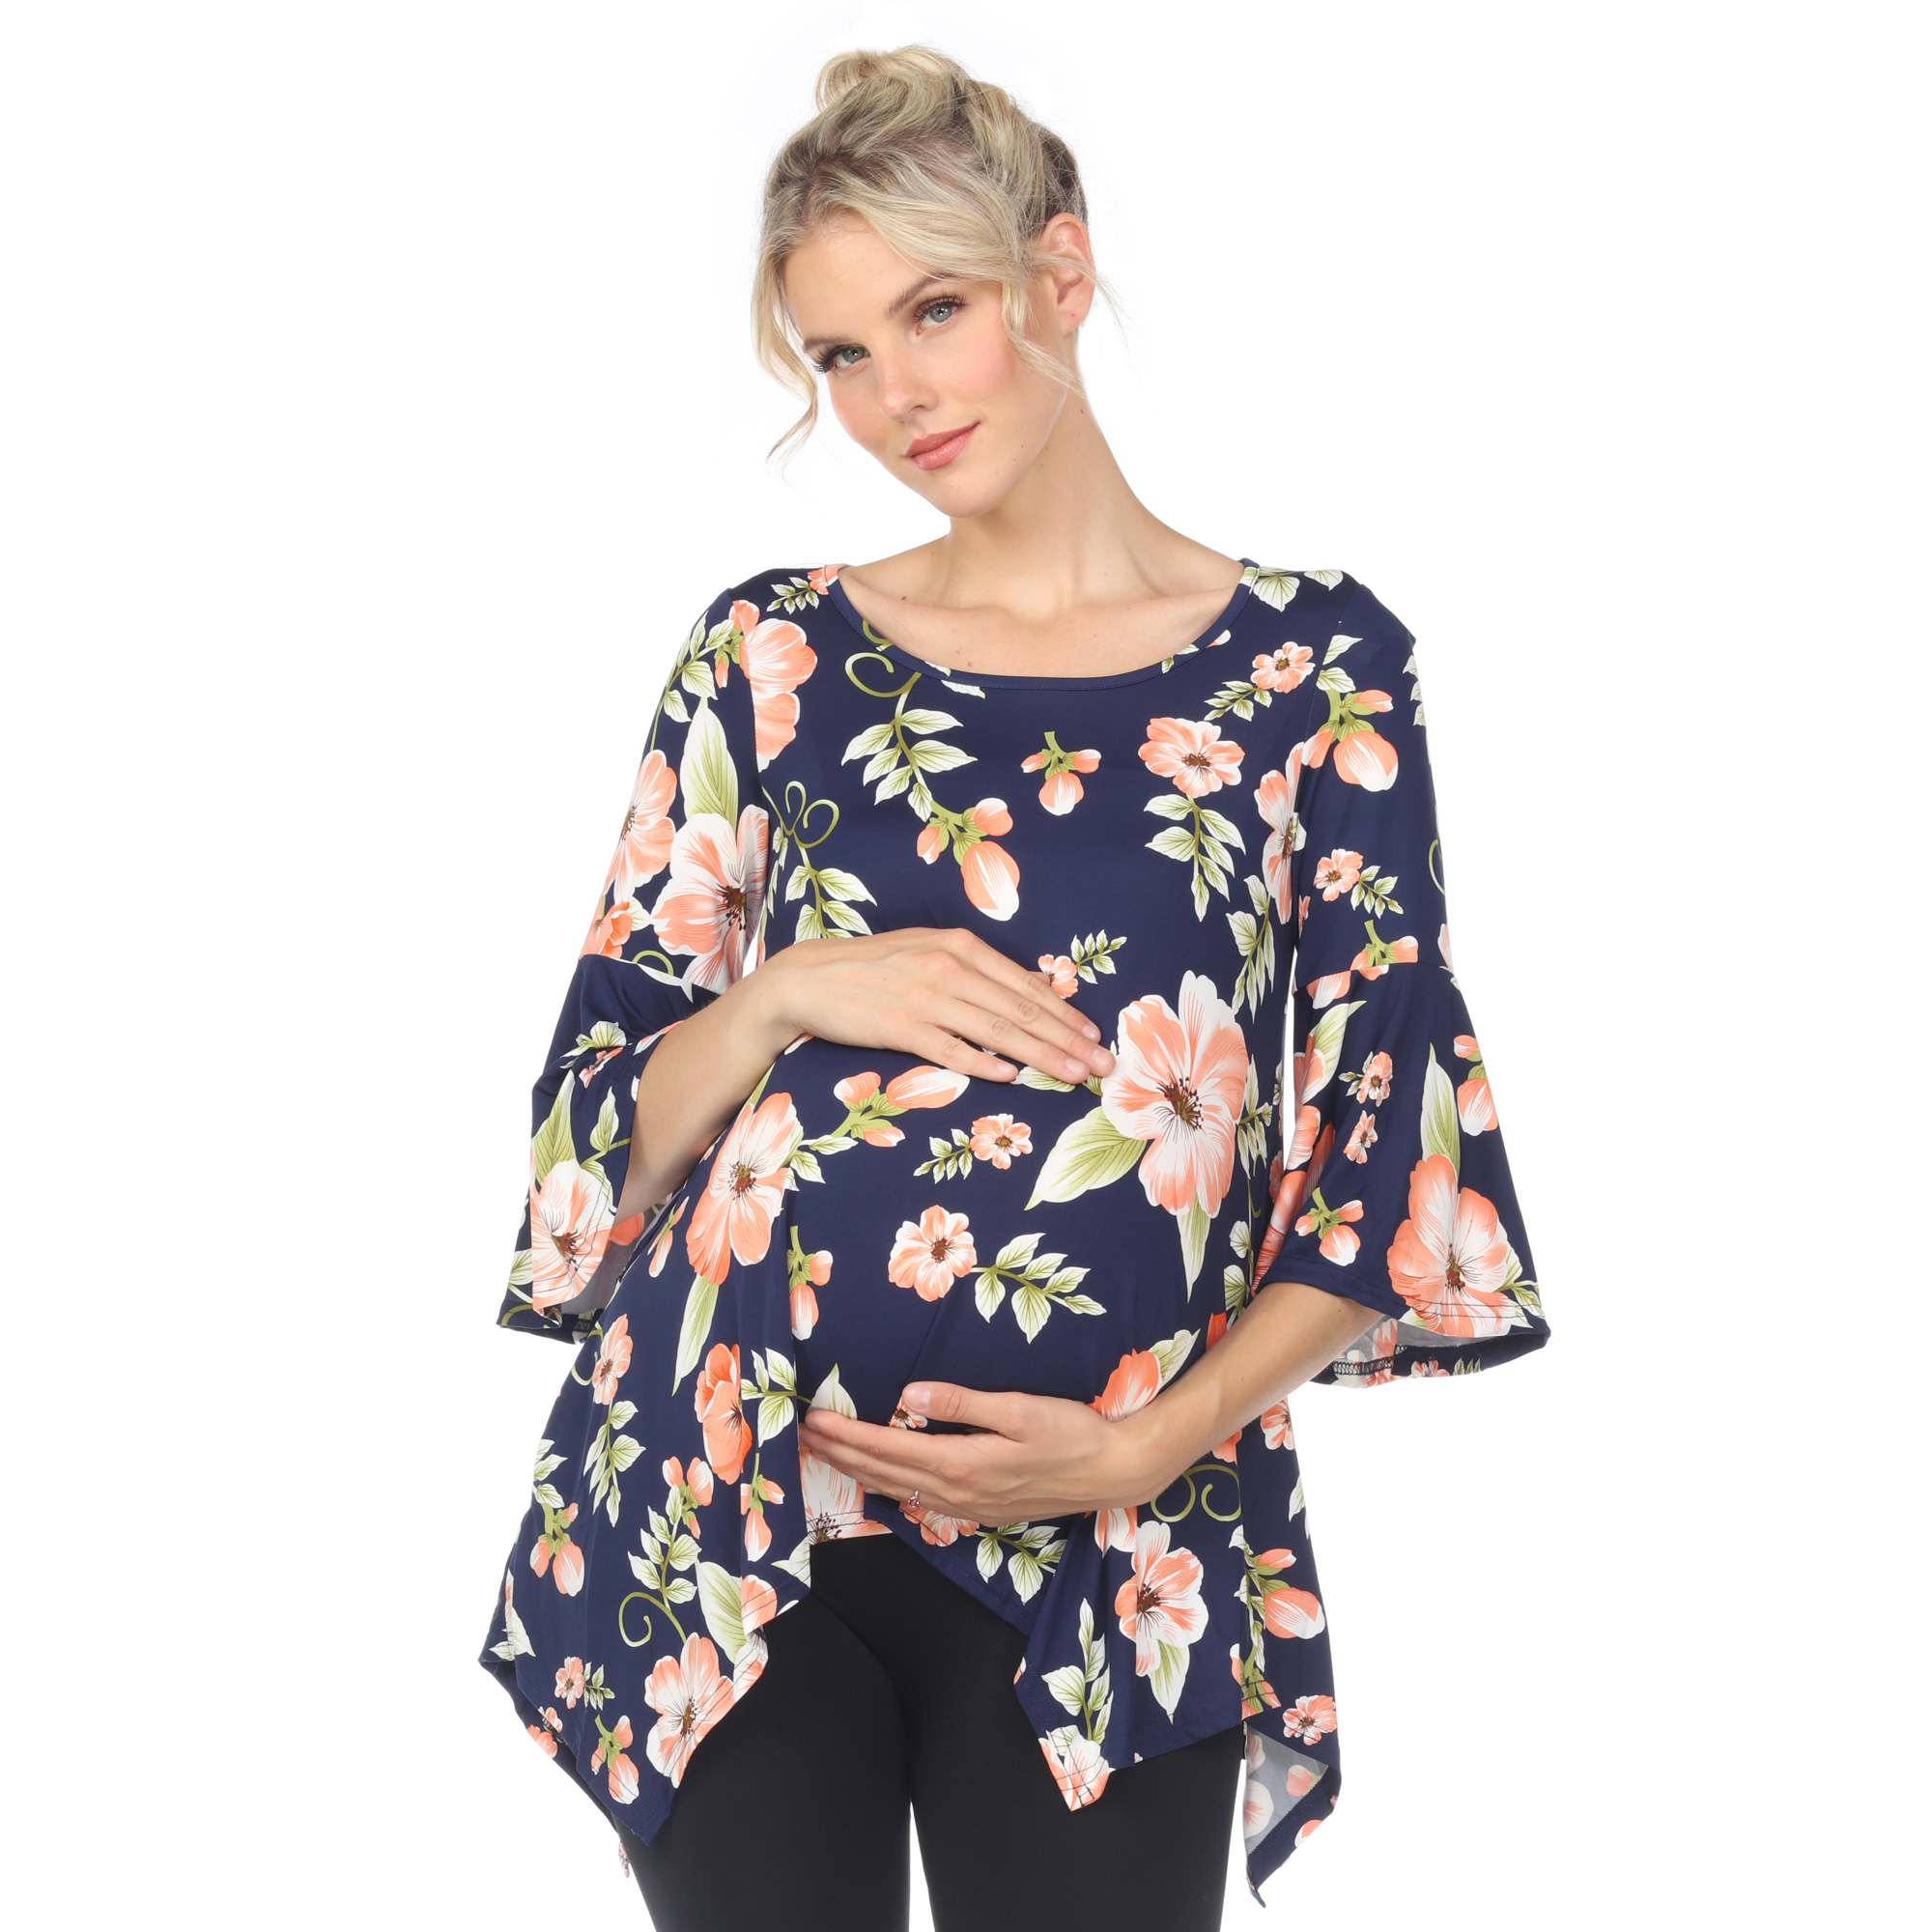 White Mark Women's Maternity Floral Print Quarter Sleeve Tunic Top With Pockets - Peach Flower, Large